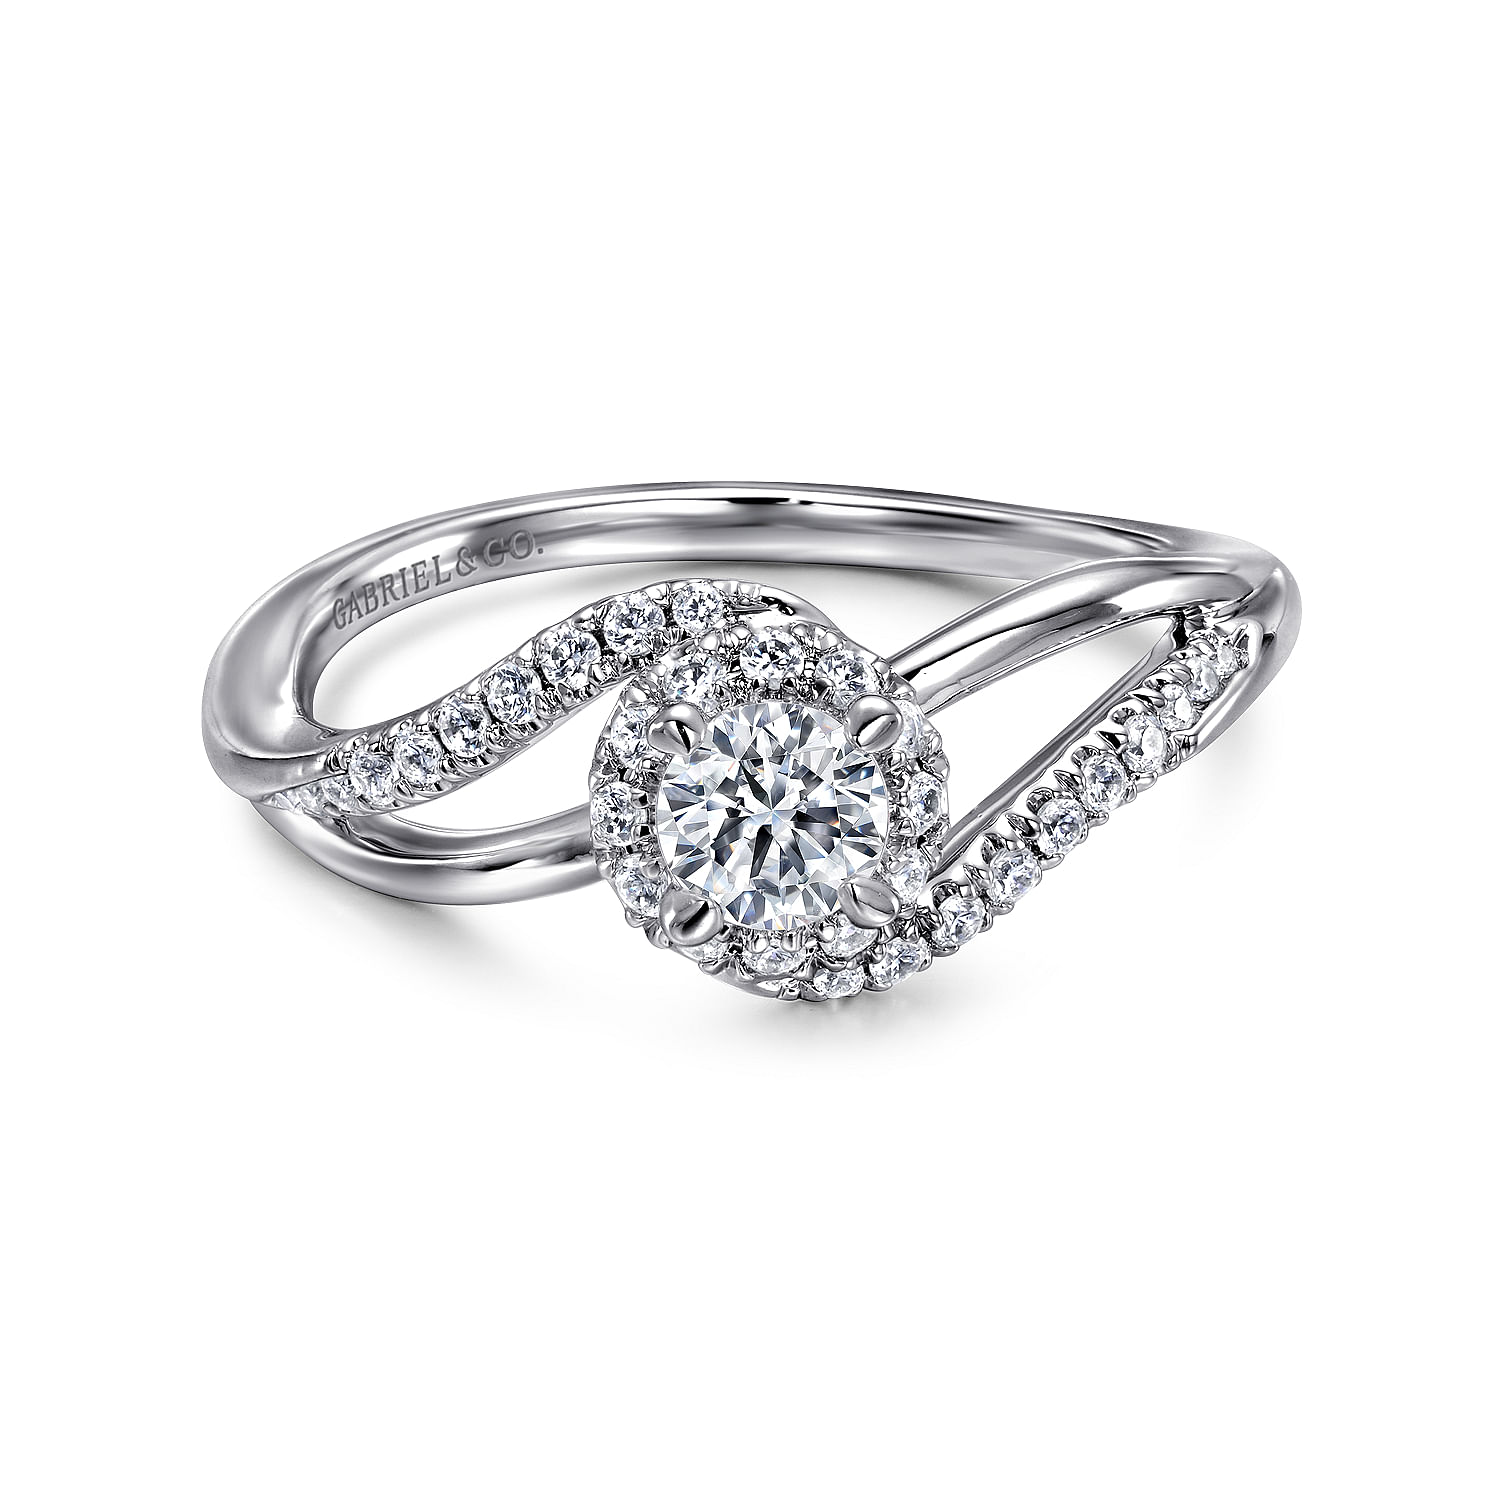 Seville - 14K White Gold Round Halo Bypass Complete Diamond Engagement Ring